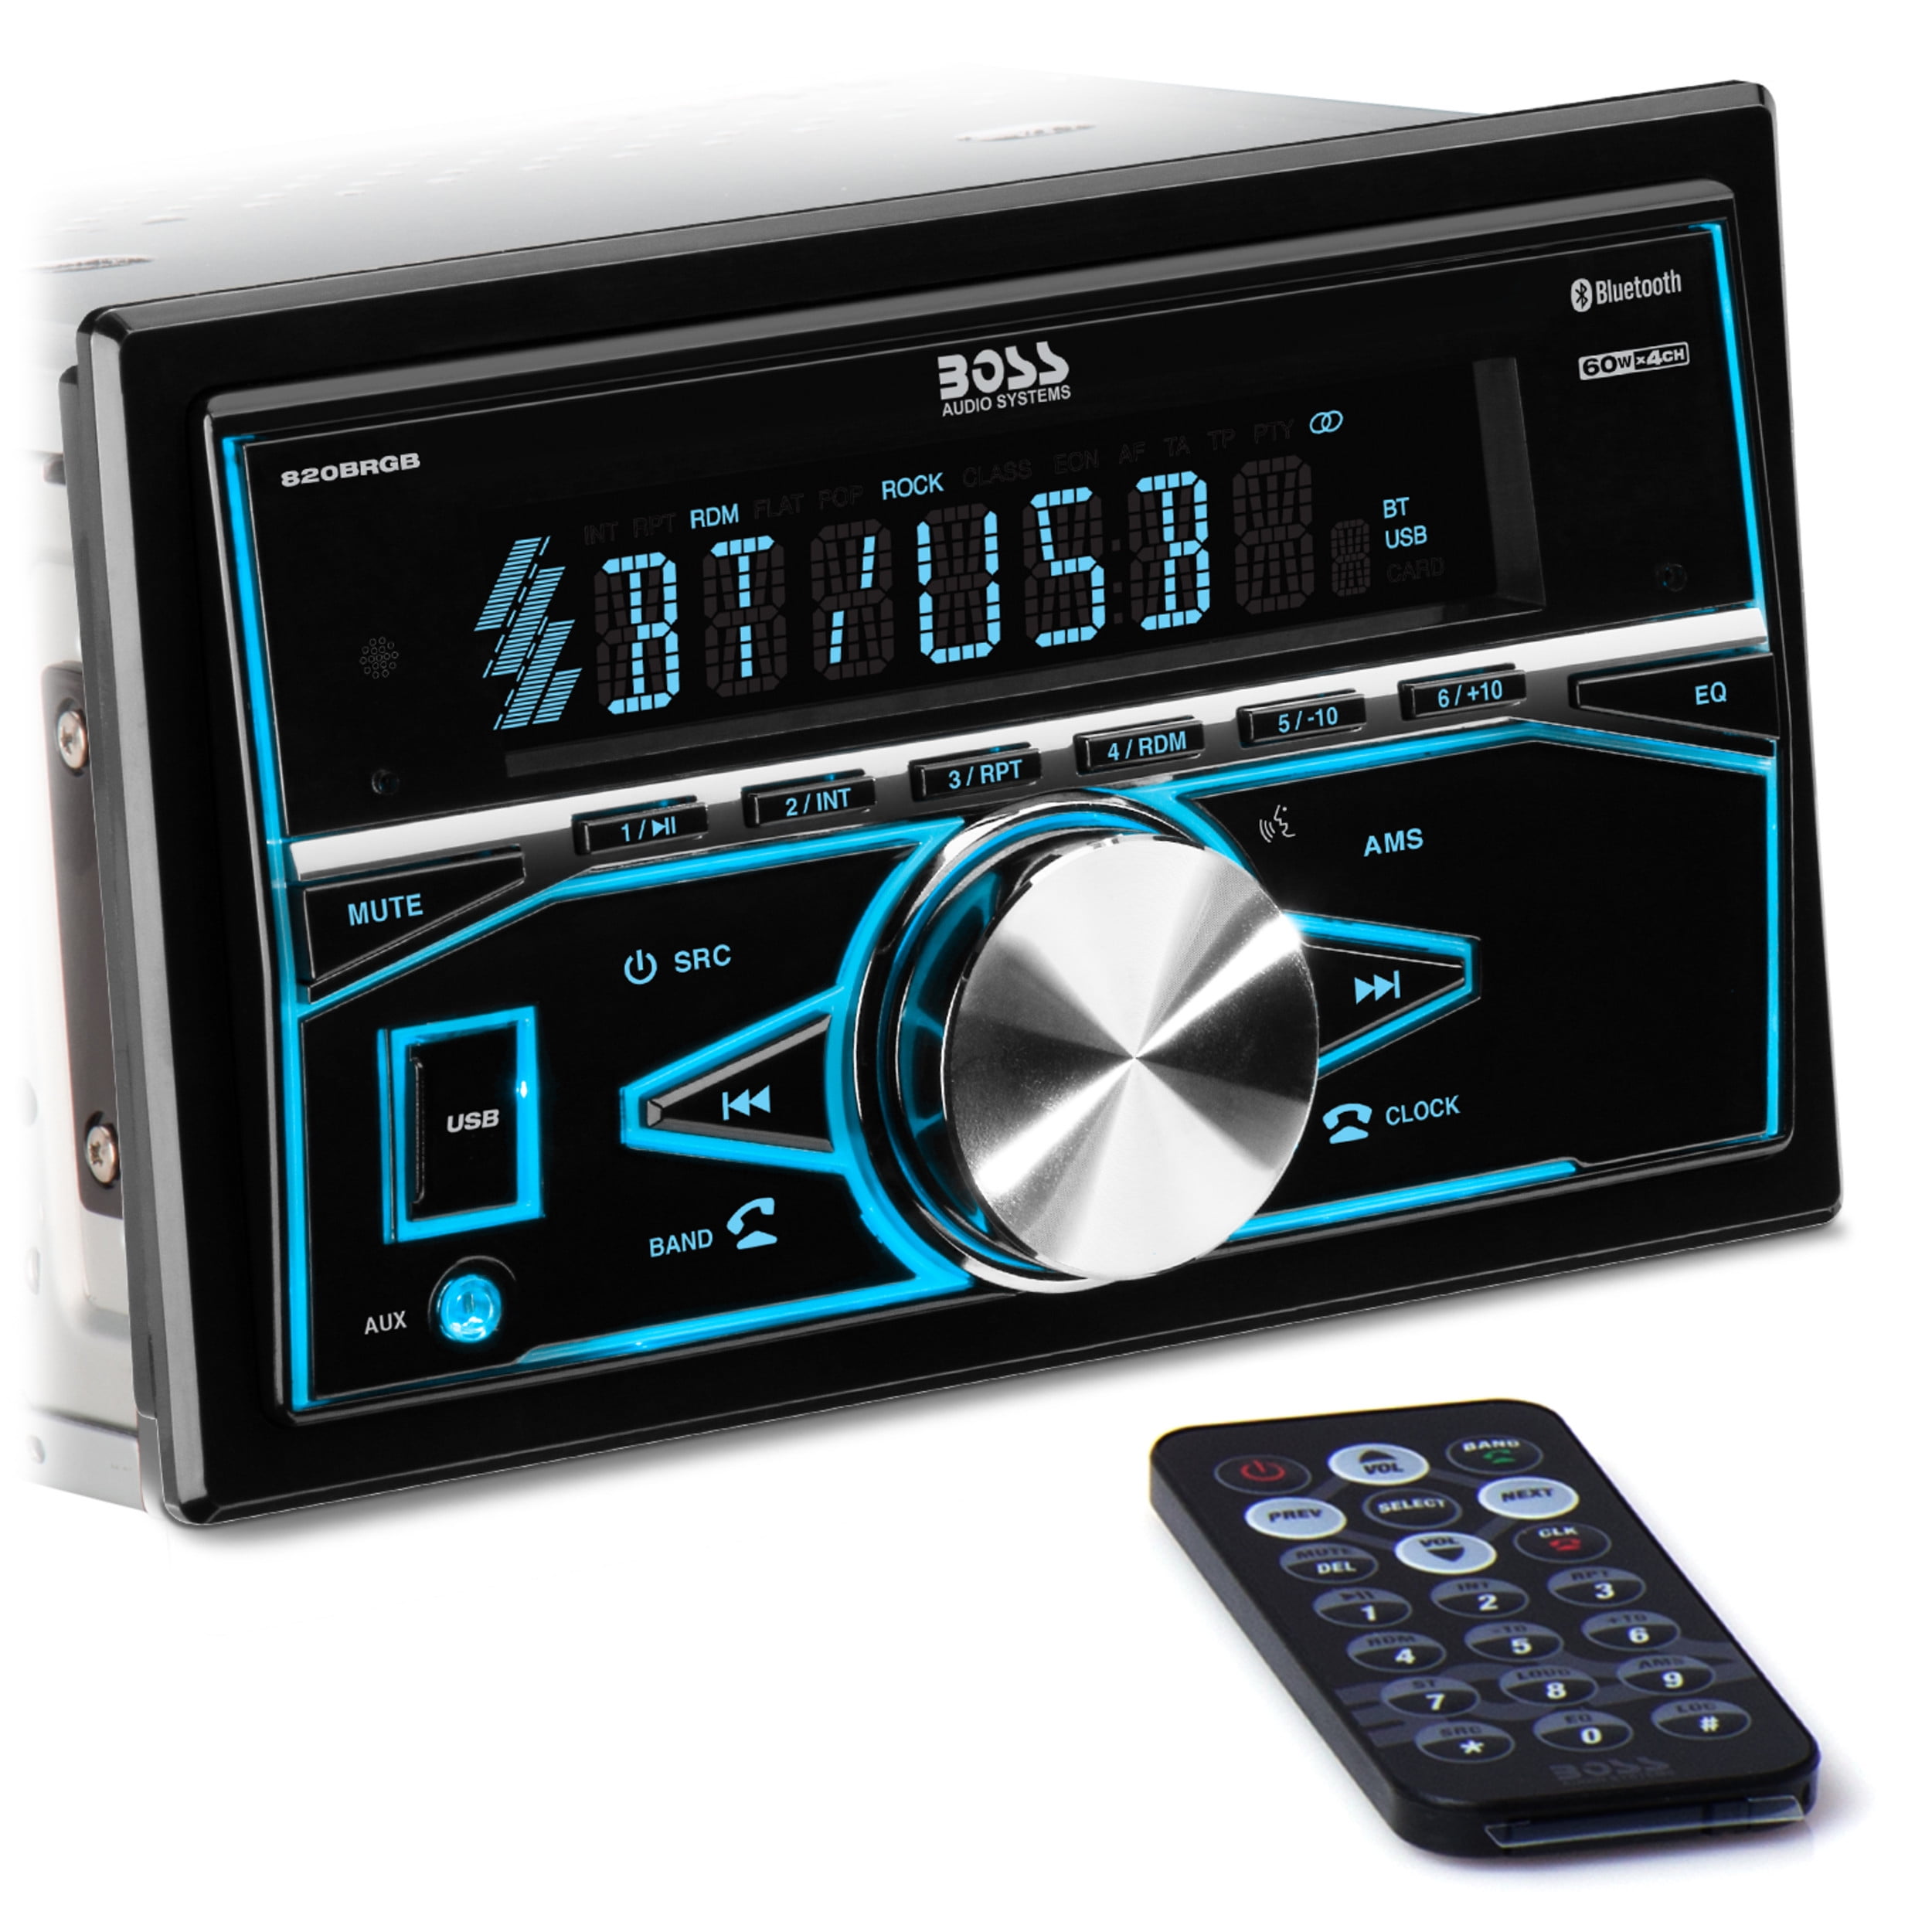 BOSS Audio Systems 820BRGB Car Audio Stereo System Double Din, Bluetooth  Audio and Calling Head Unit, Aux In, USB, No CD Player, Multi Color  Illumination, AM/FM Radio Receiver, Hook up to